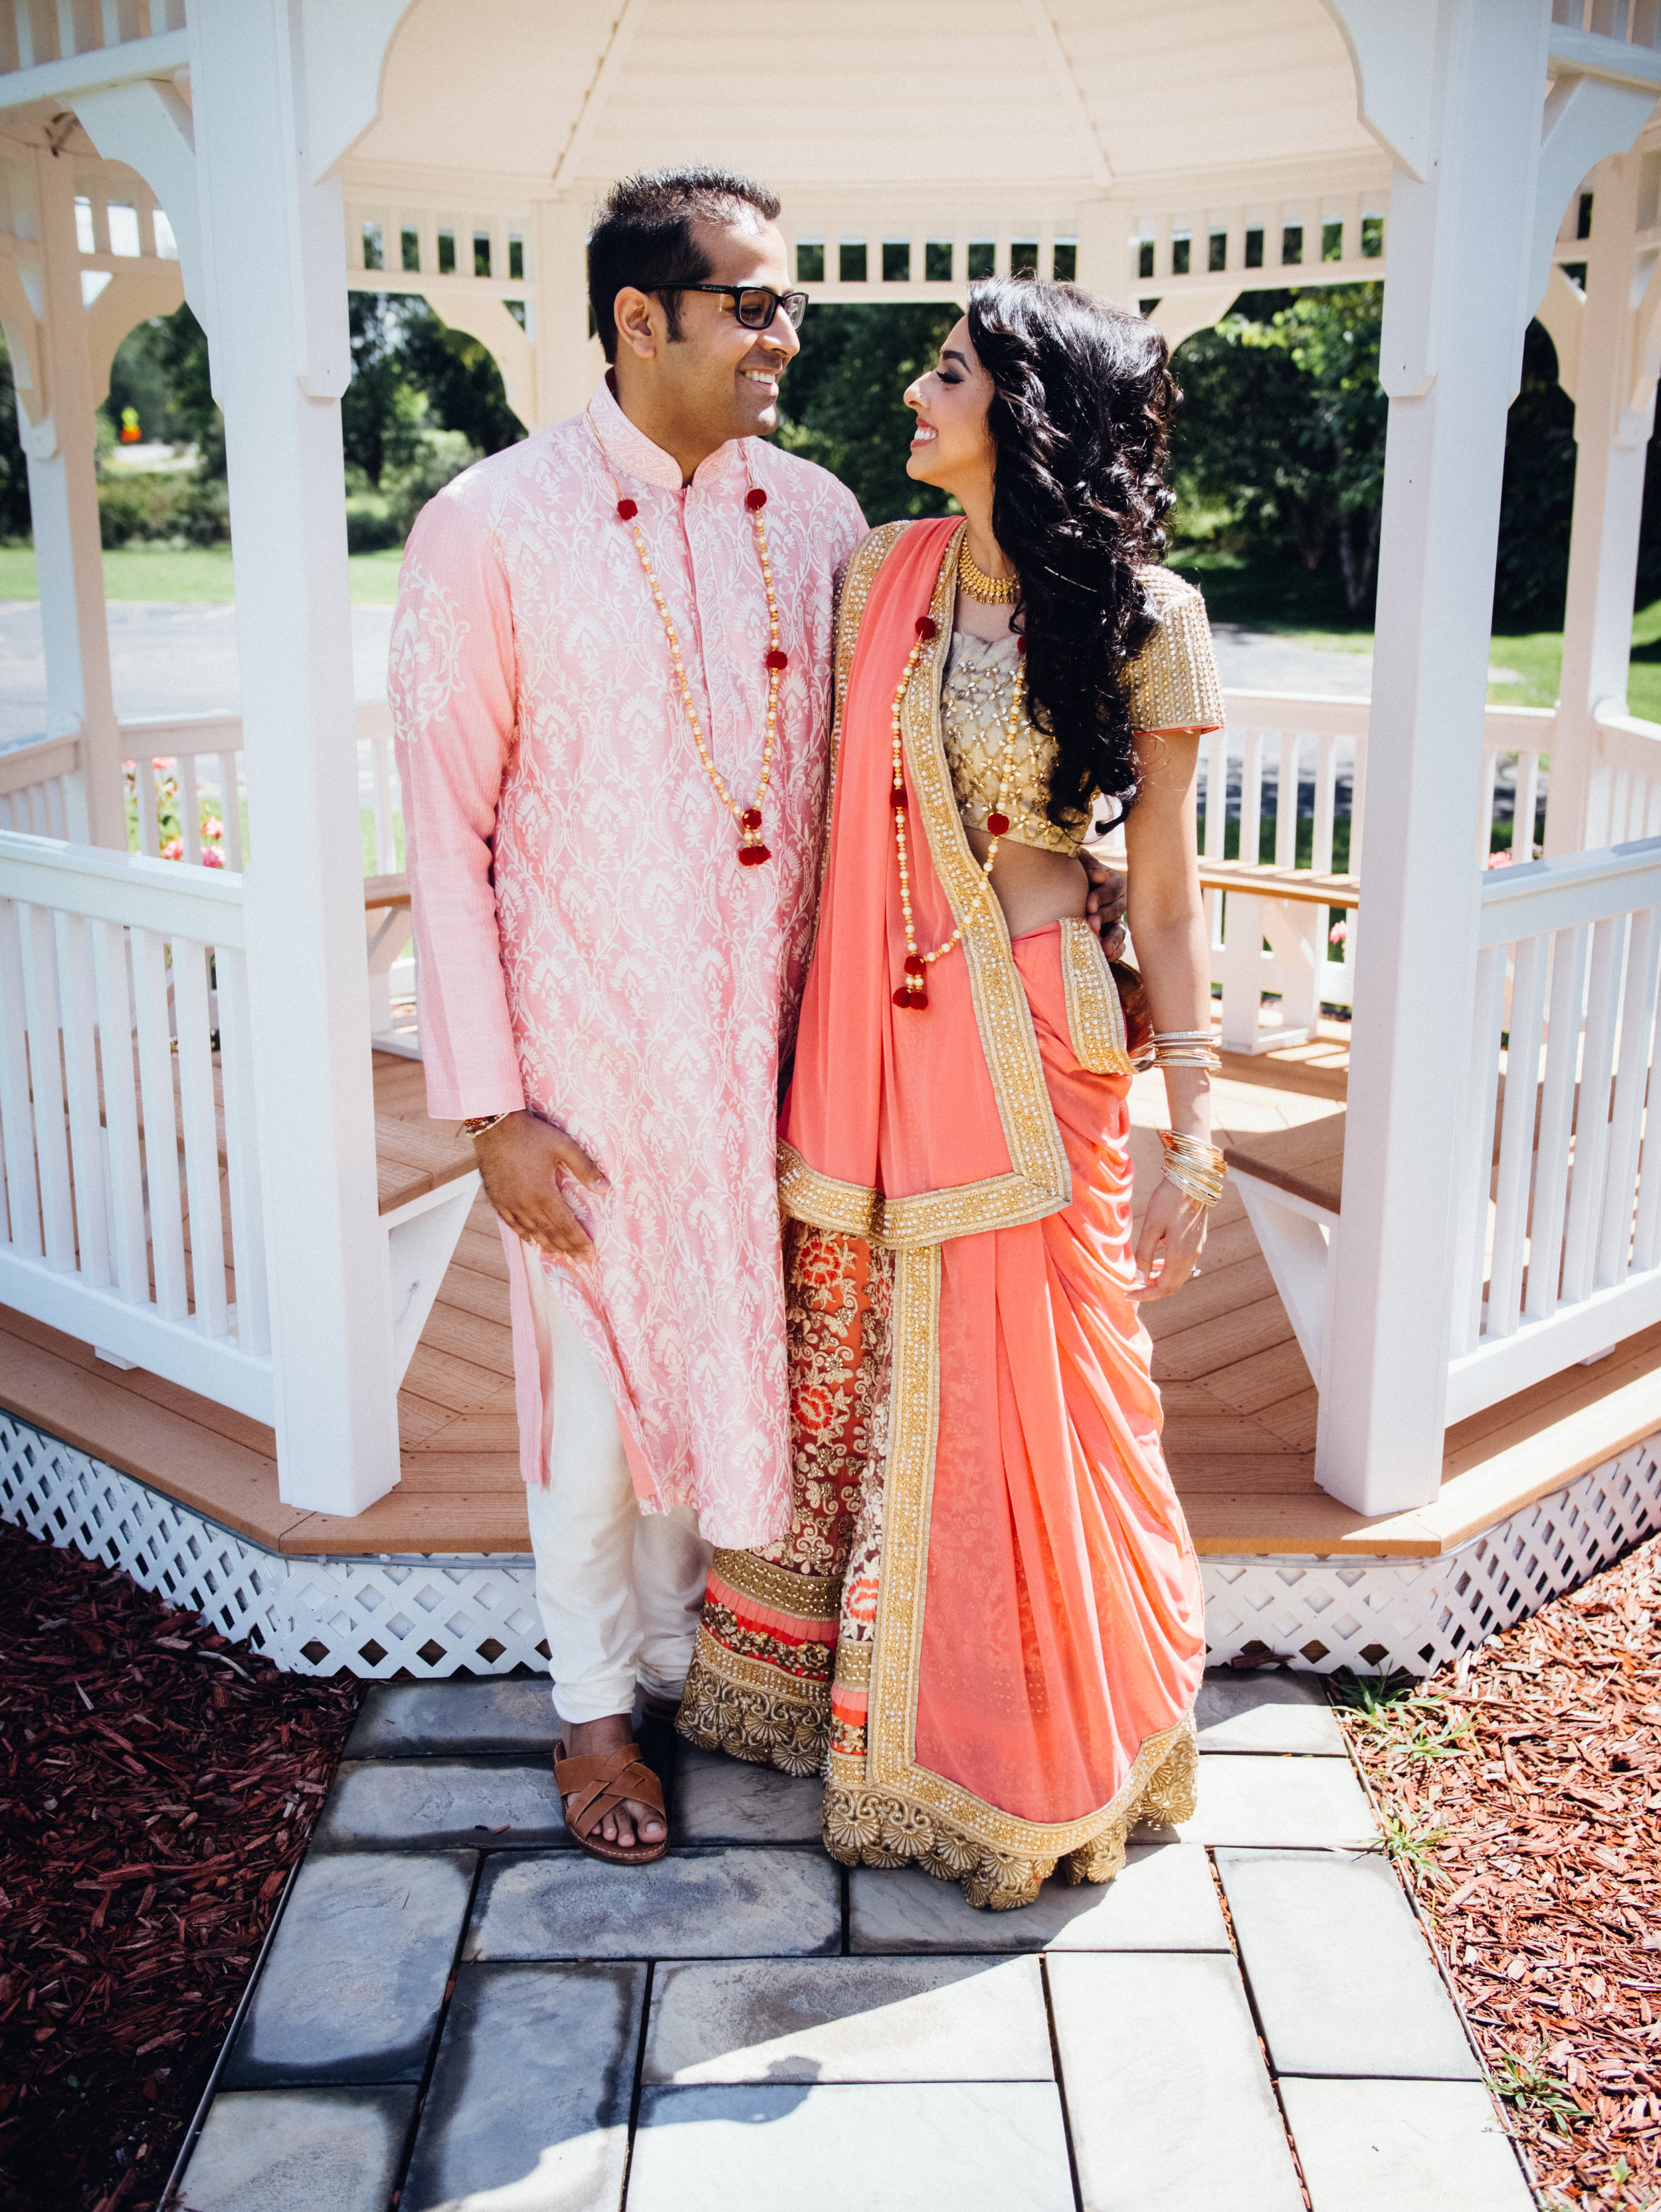 Videographer-Videographers-Videography-Wedding-Photographers-Photography-Photographer-Indian-Engagement-Ceremony-Shadow-Shine-Pictures-Lansing-Detroit